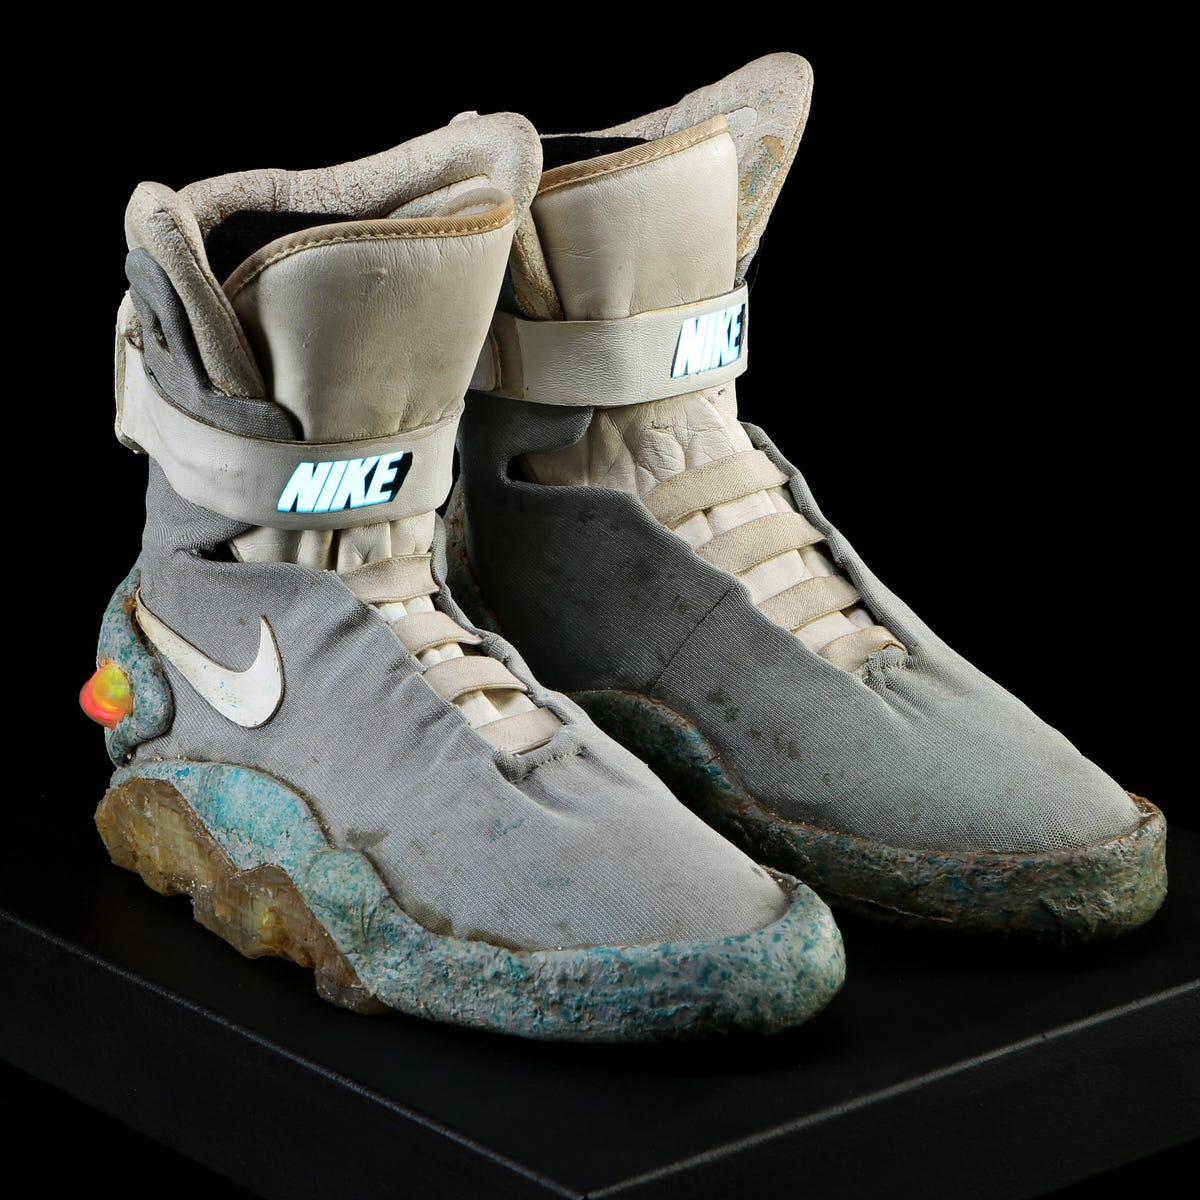 soep Vuil Meyella Back to the Future' Nike Mag shoes can be yours - CNET